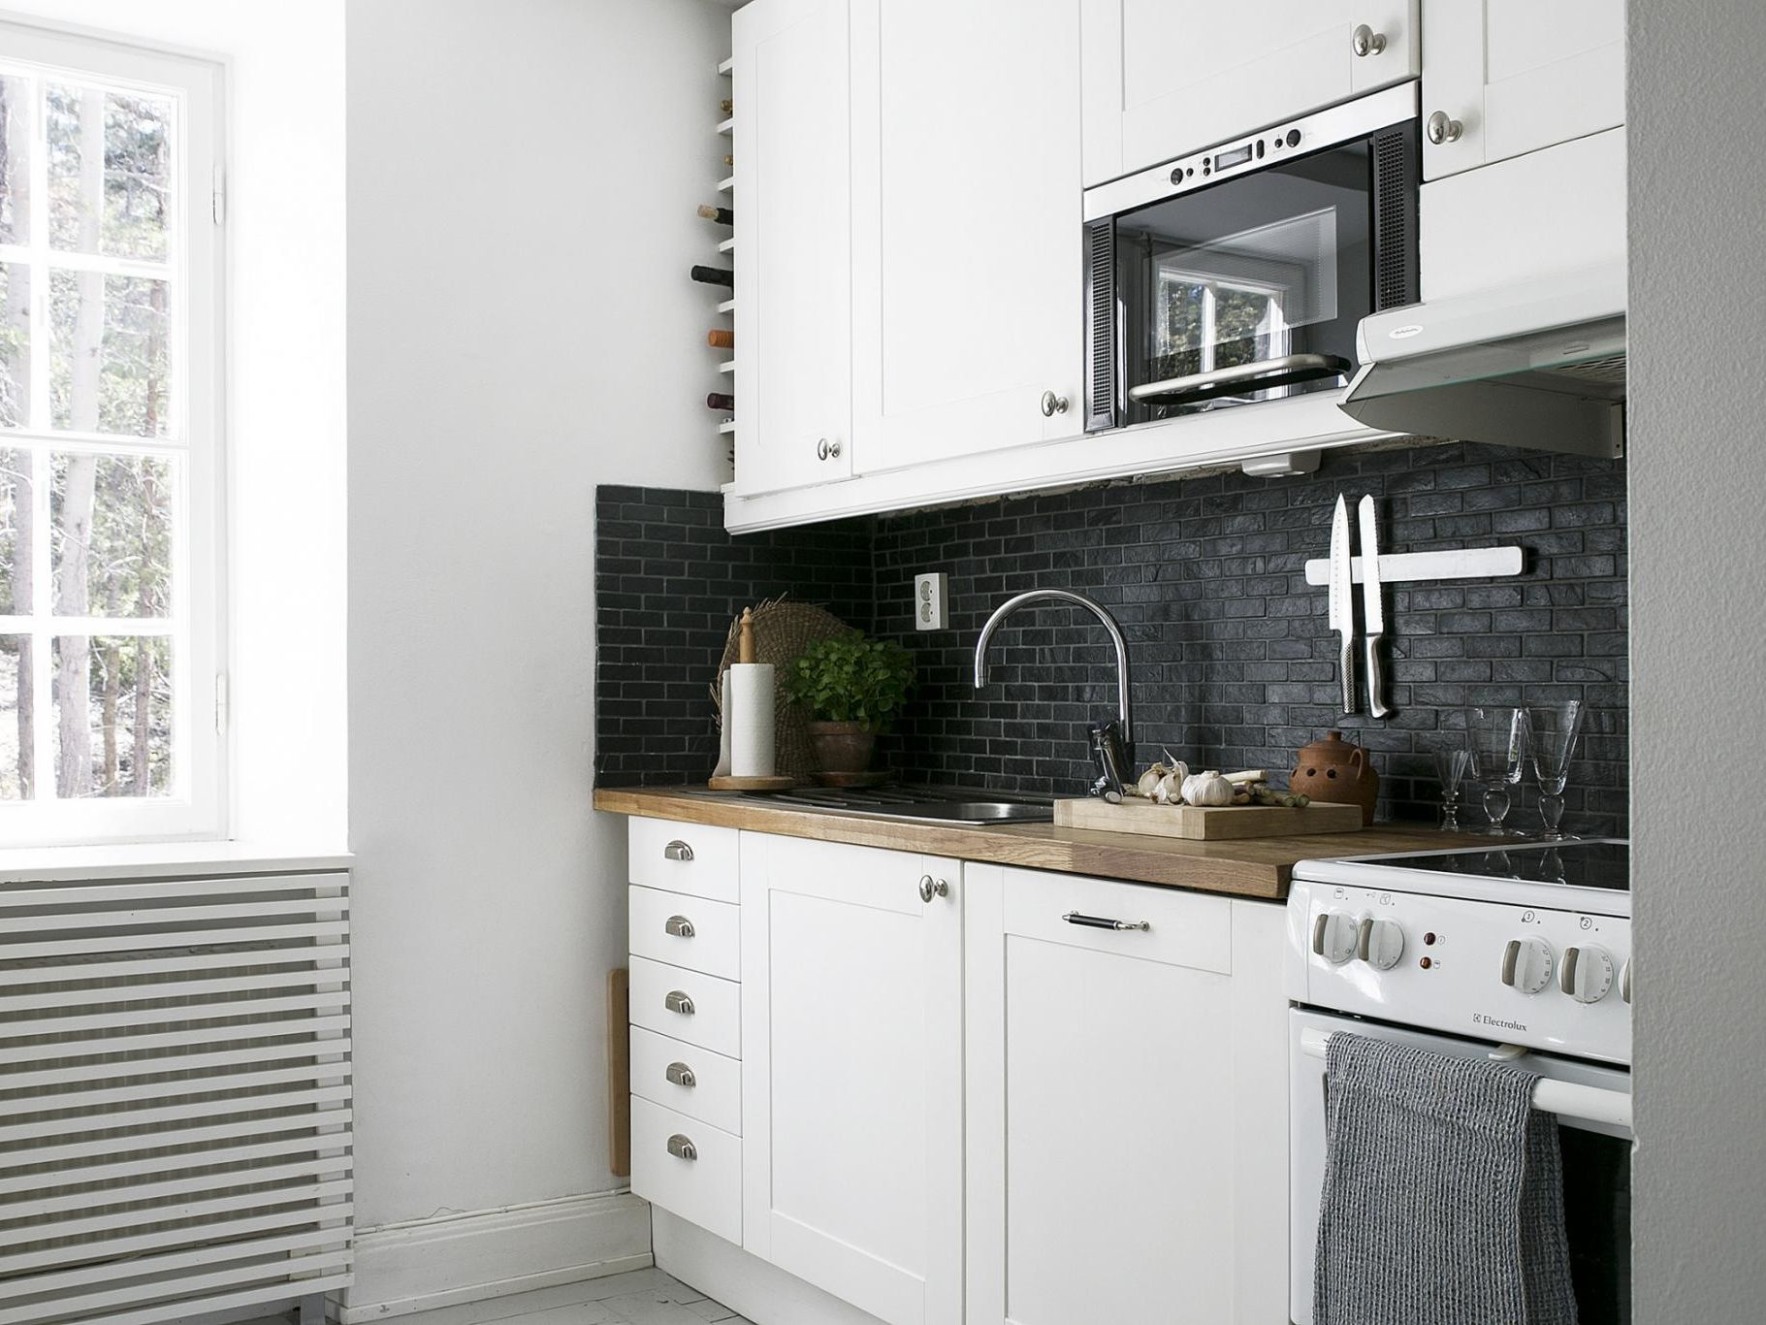 5 Beautiful Small Kitchen Ideas - what size is a small kitchen?